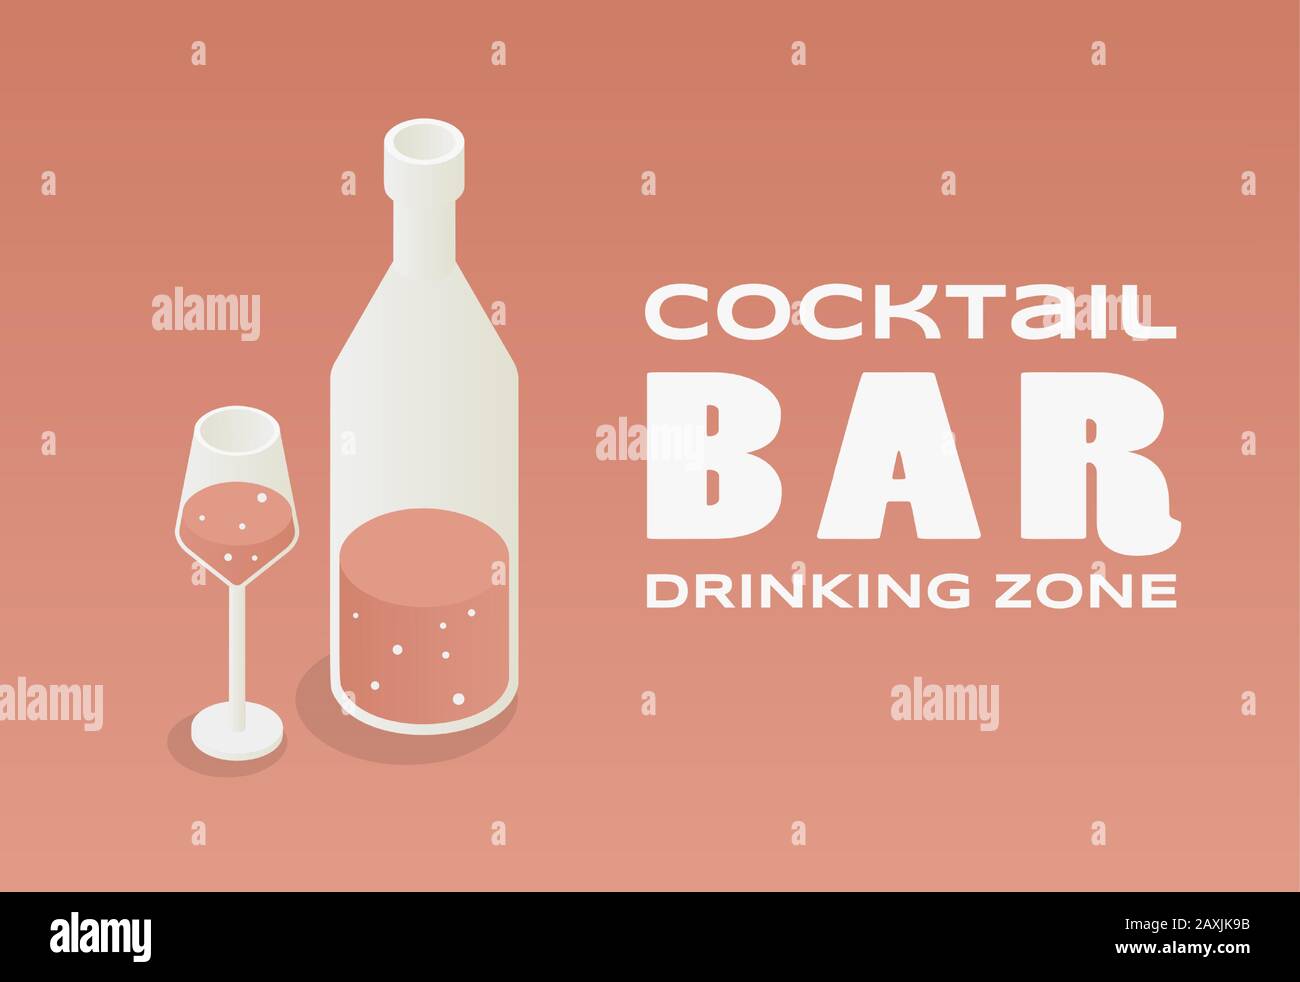 Coctail bar banner design concept. Vector illustration of wine bottle and glass of wine with text space isolate on pink background. Drinking zone, alcohol drinks poster design. Stock Vector